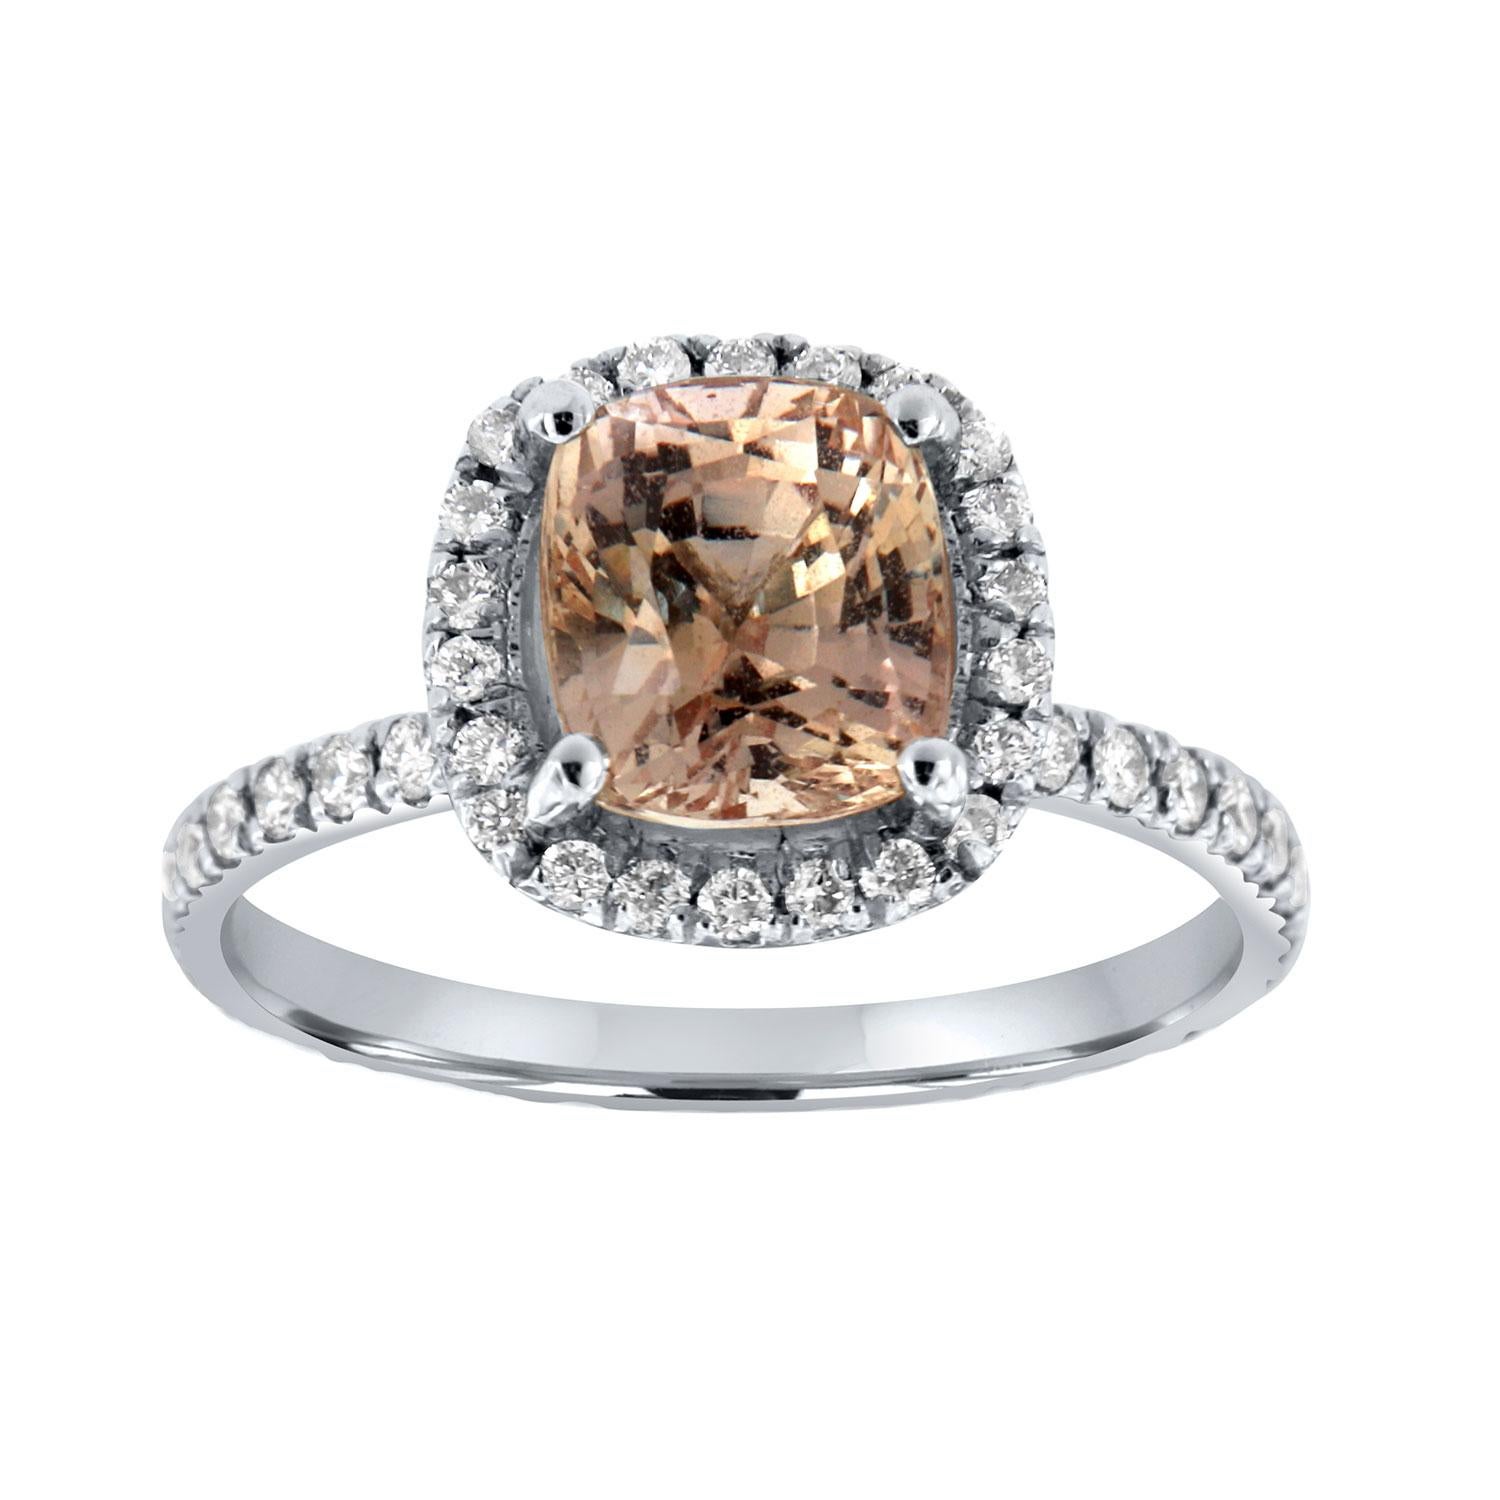 This Platinum Ring Set features a 2.46-carat Cushion shape Pinkish Orange Padparadscha Sapphire encircled by a halo of brilliant round diamonds on top of a 1.6mm wide eternity band. A perfectly matching diamond eternity band completes this delicate